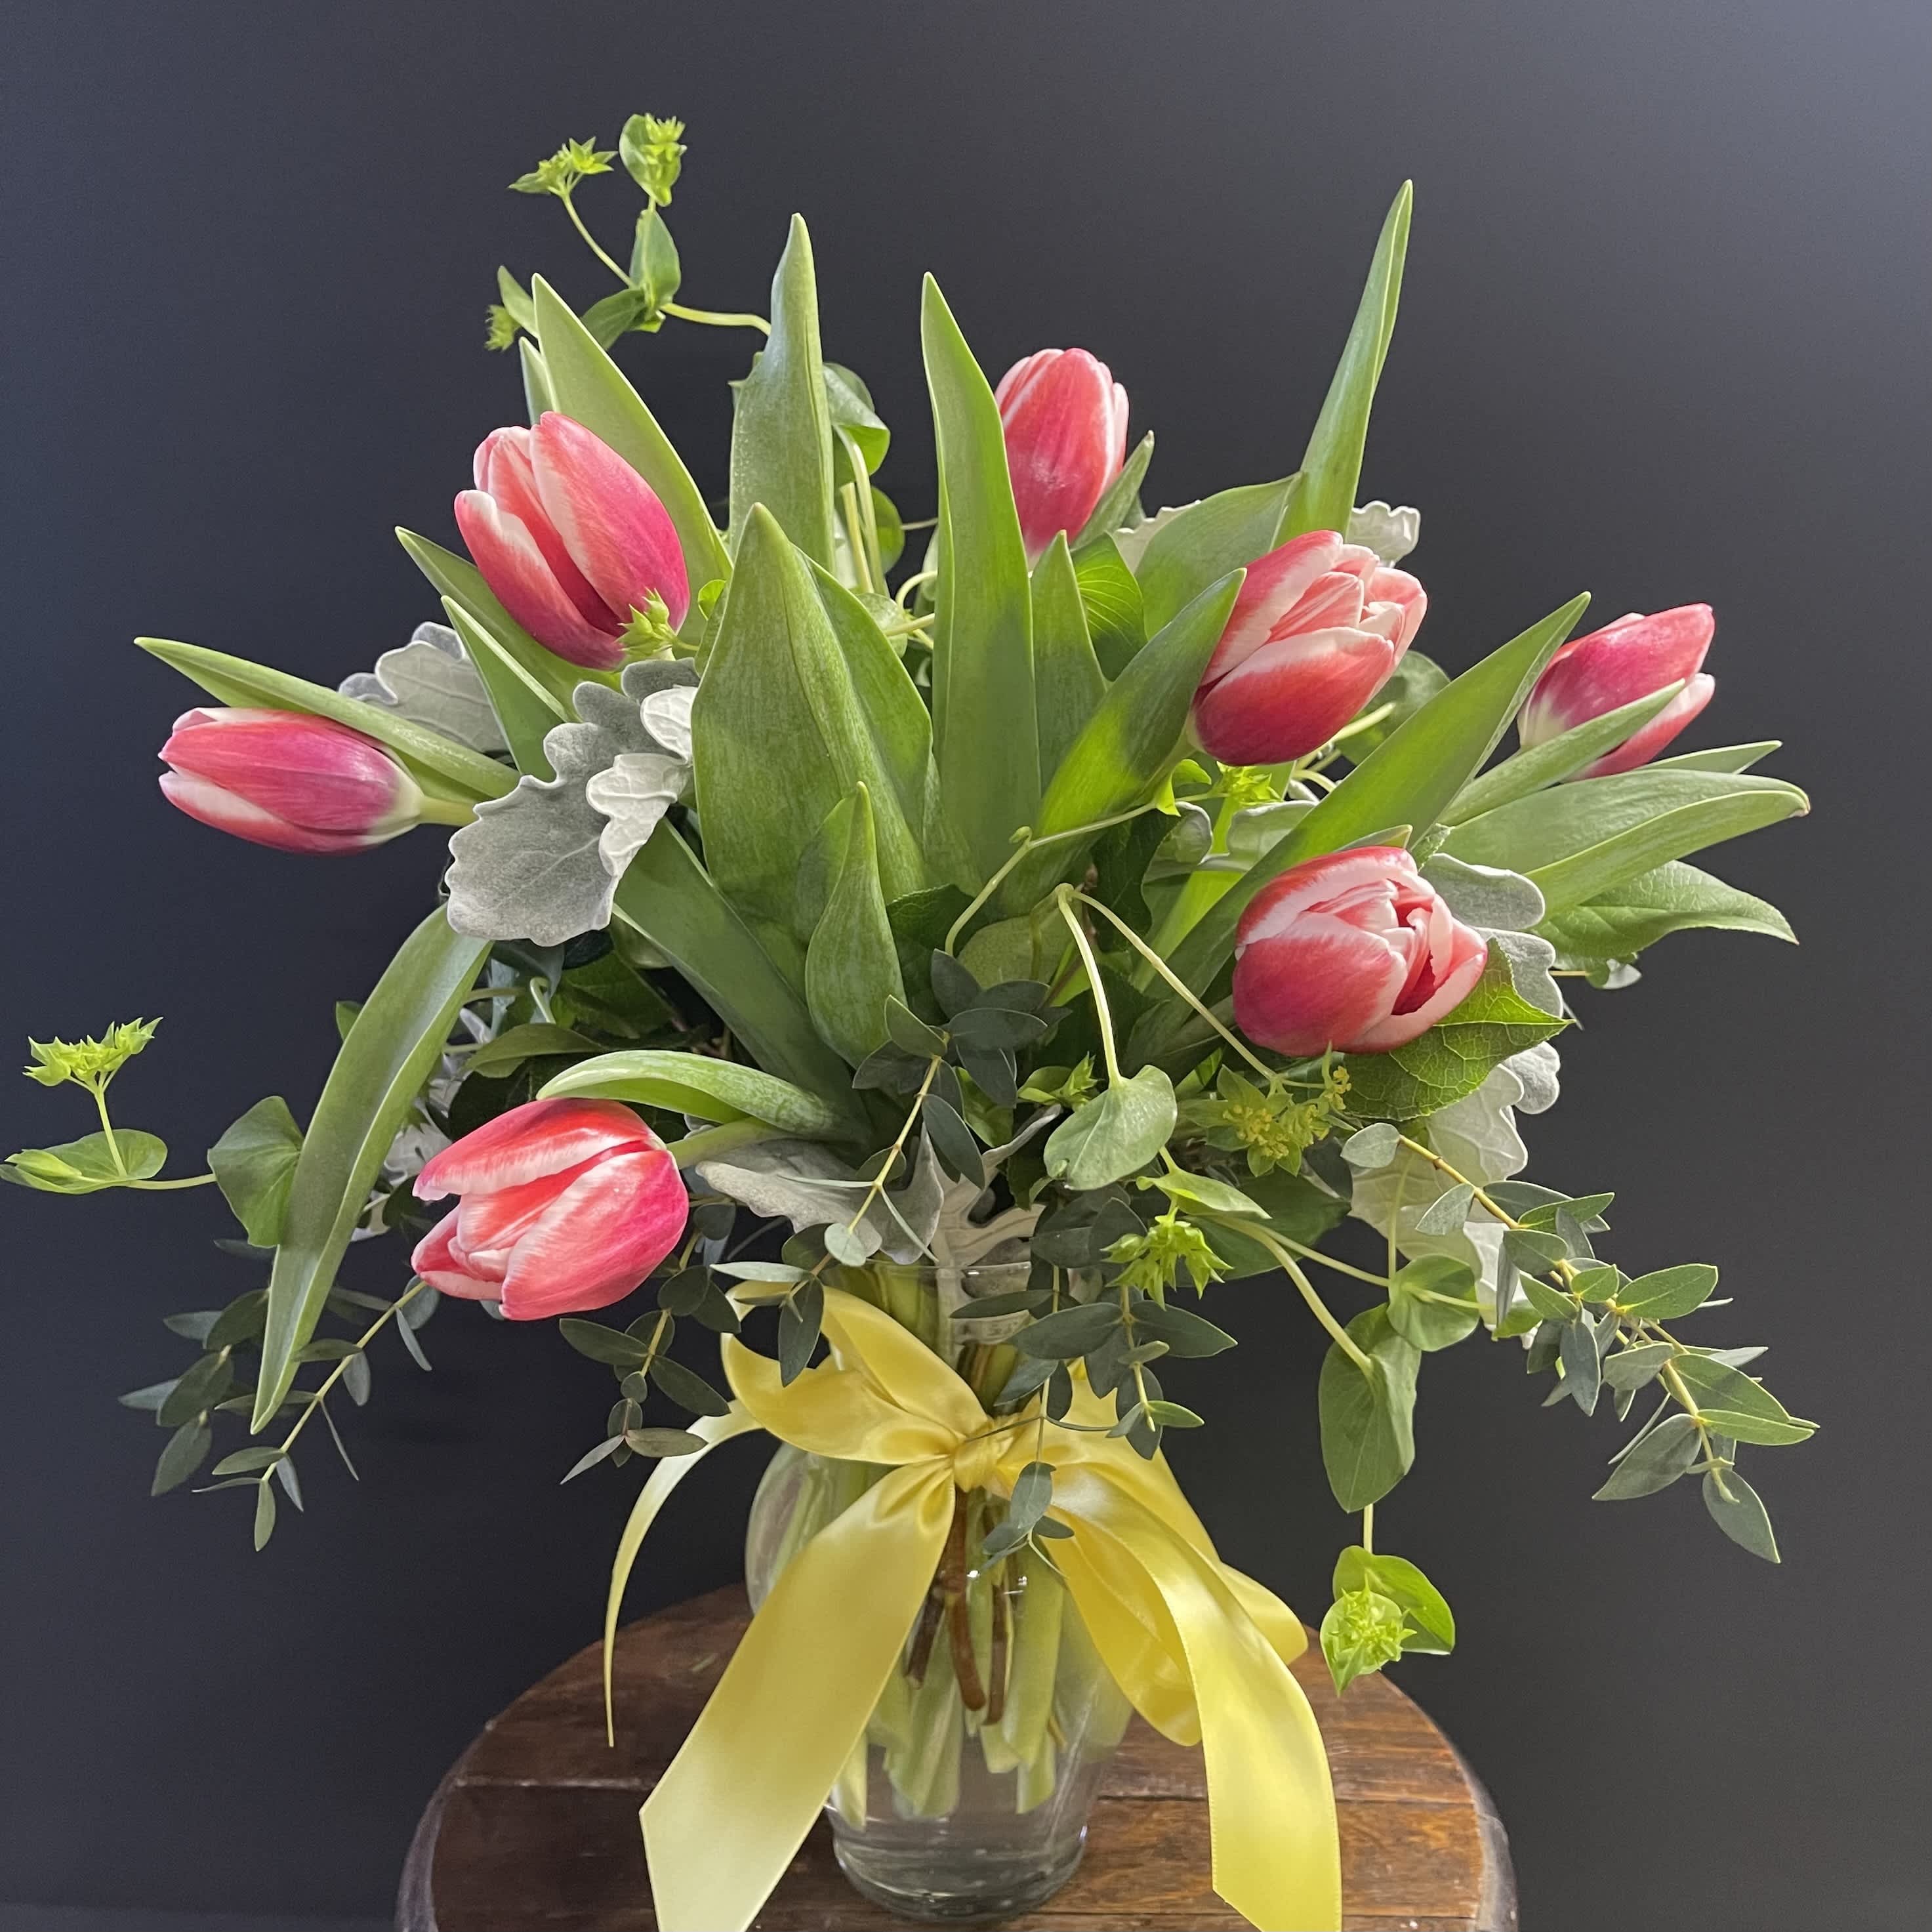 Lil' Vase O' Tulips - Typical vase of 10 tulips from Raindrops.  Tulips are a rare treat.  Watch them grow each day and then fully open!  We may have to change the color of tulip based on availability. Please call to order and to make sure that tulips are available.